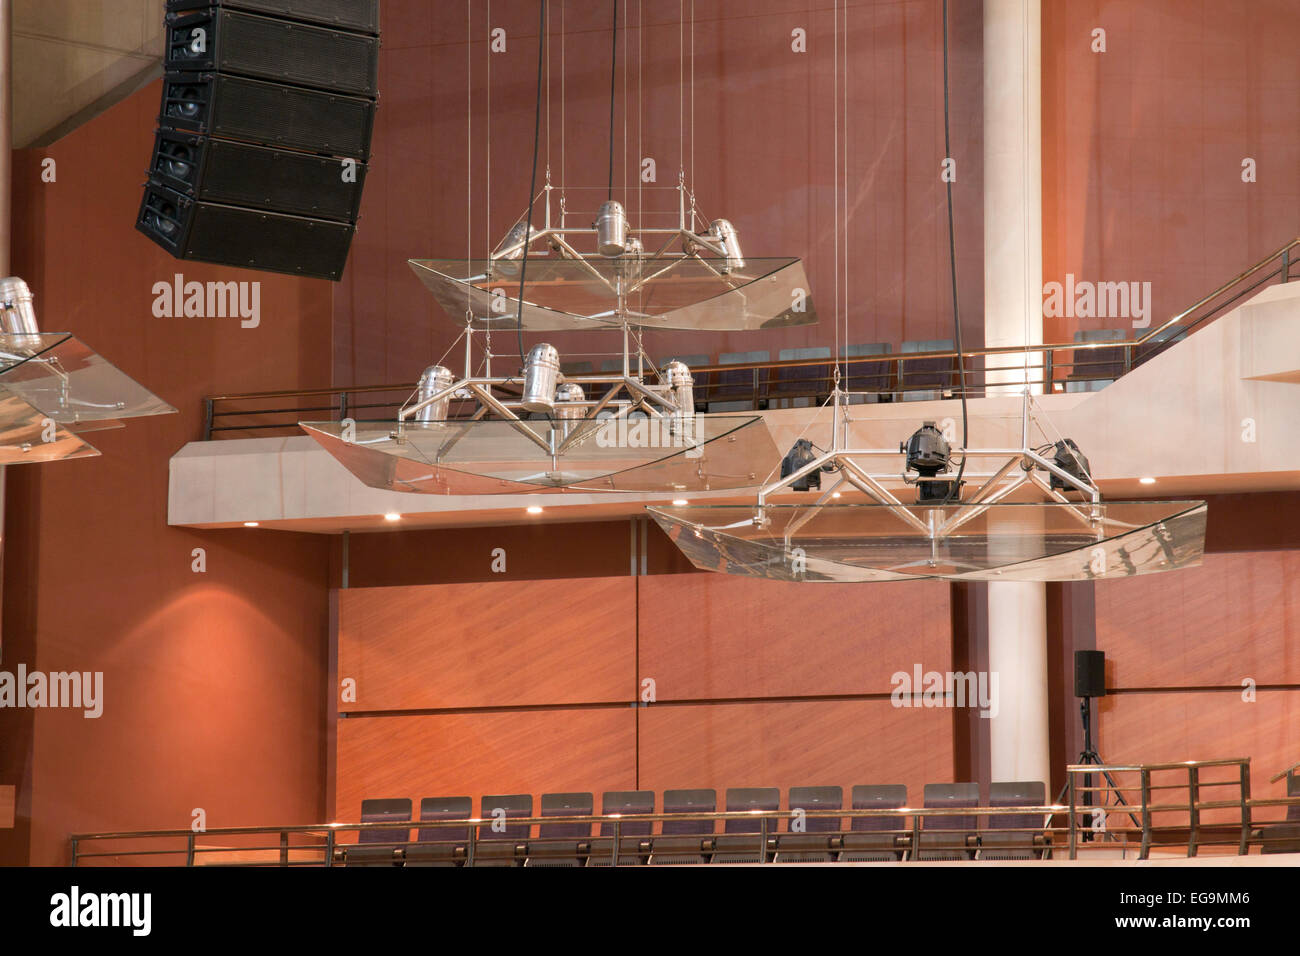 Speakers and light fittings at the Bridgewater Hall auditorium in Manchester, UK. Stock Photo